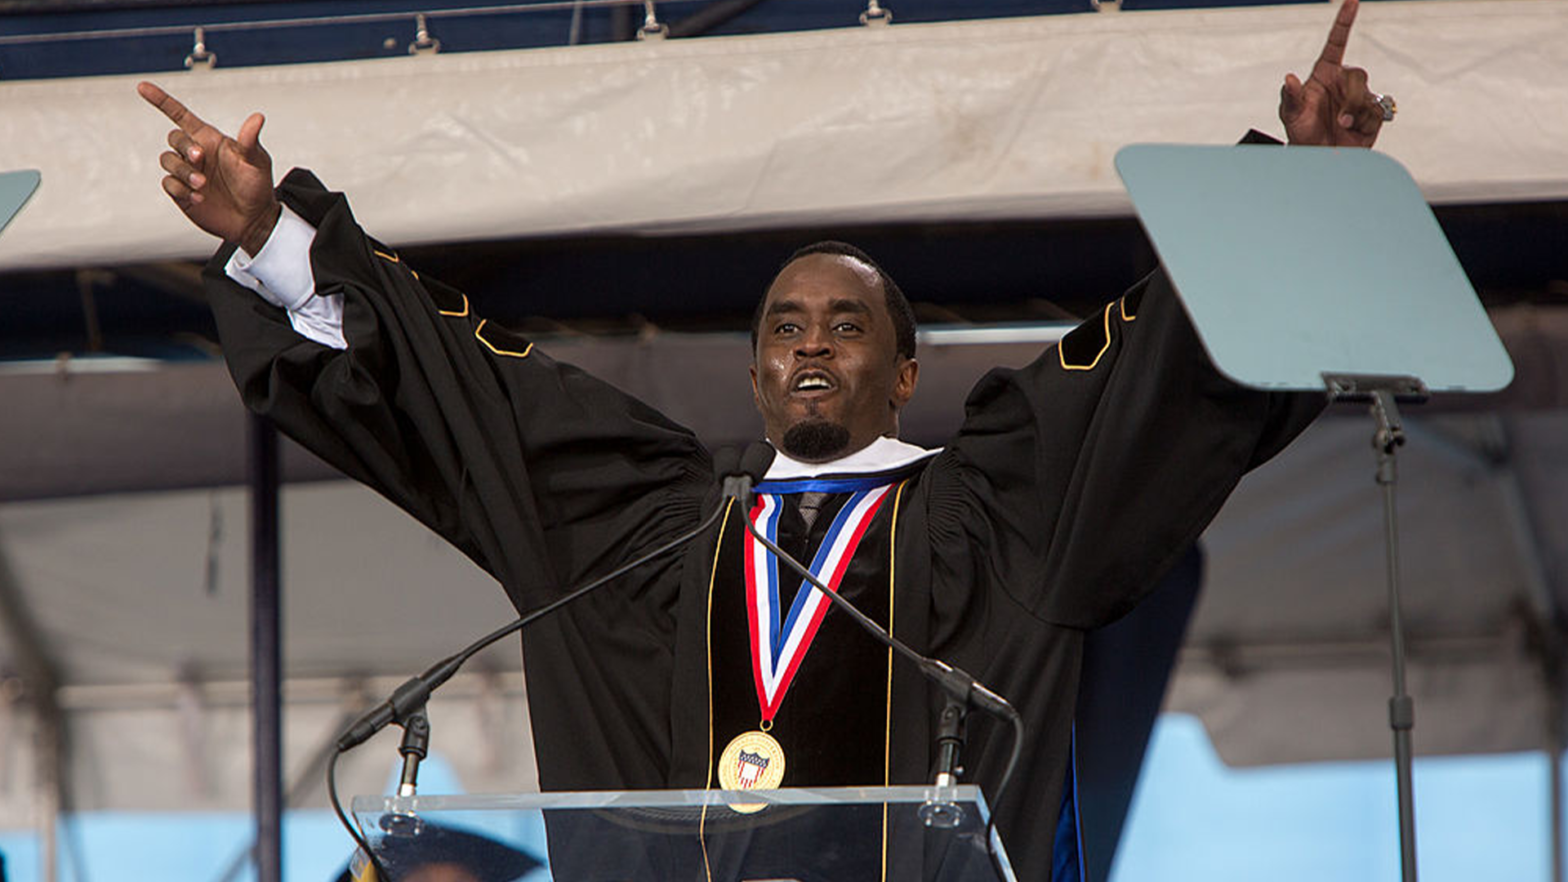 Diddy Played A Part In Helping To Boost Howard University's Credit Rating In The Municipal-Bond Market, Report Says